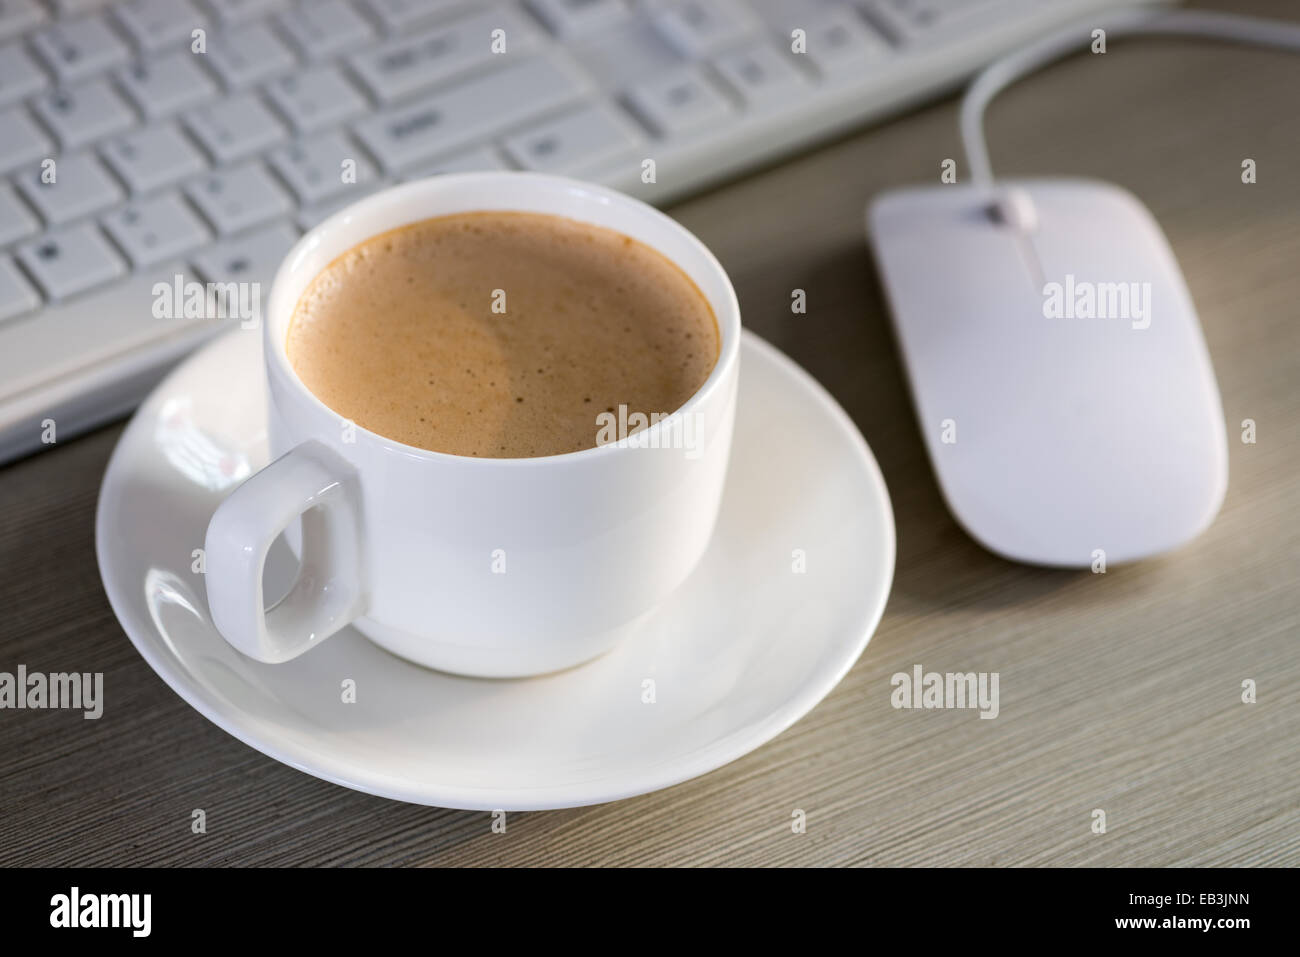 Close-up of the coffee, cellphone, pen and a cup of keyboard on the desktop Stock Photo